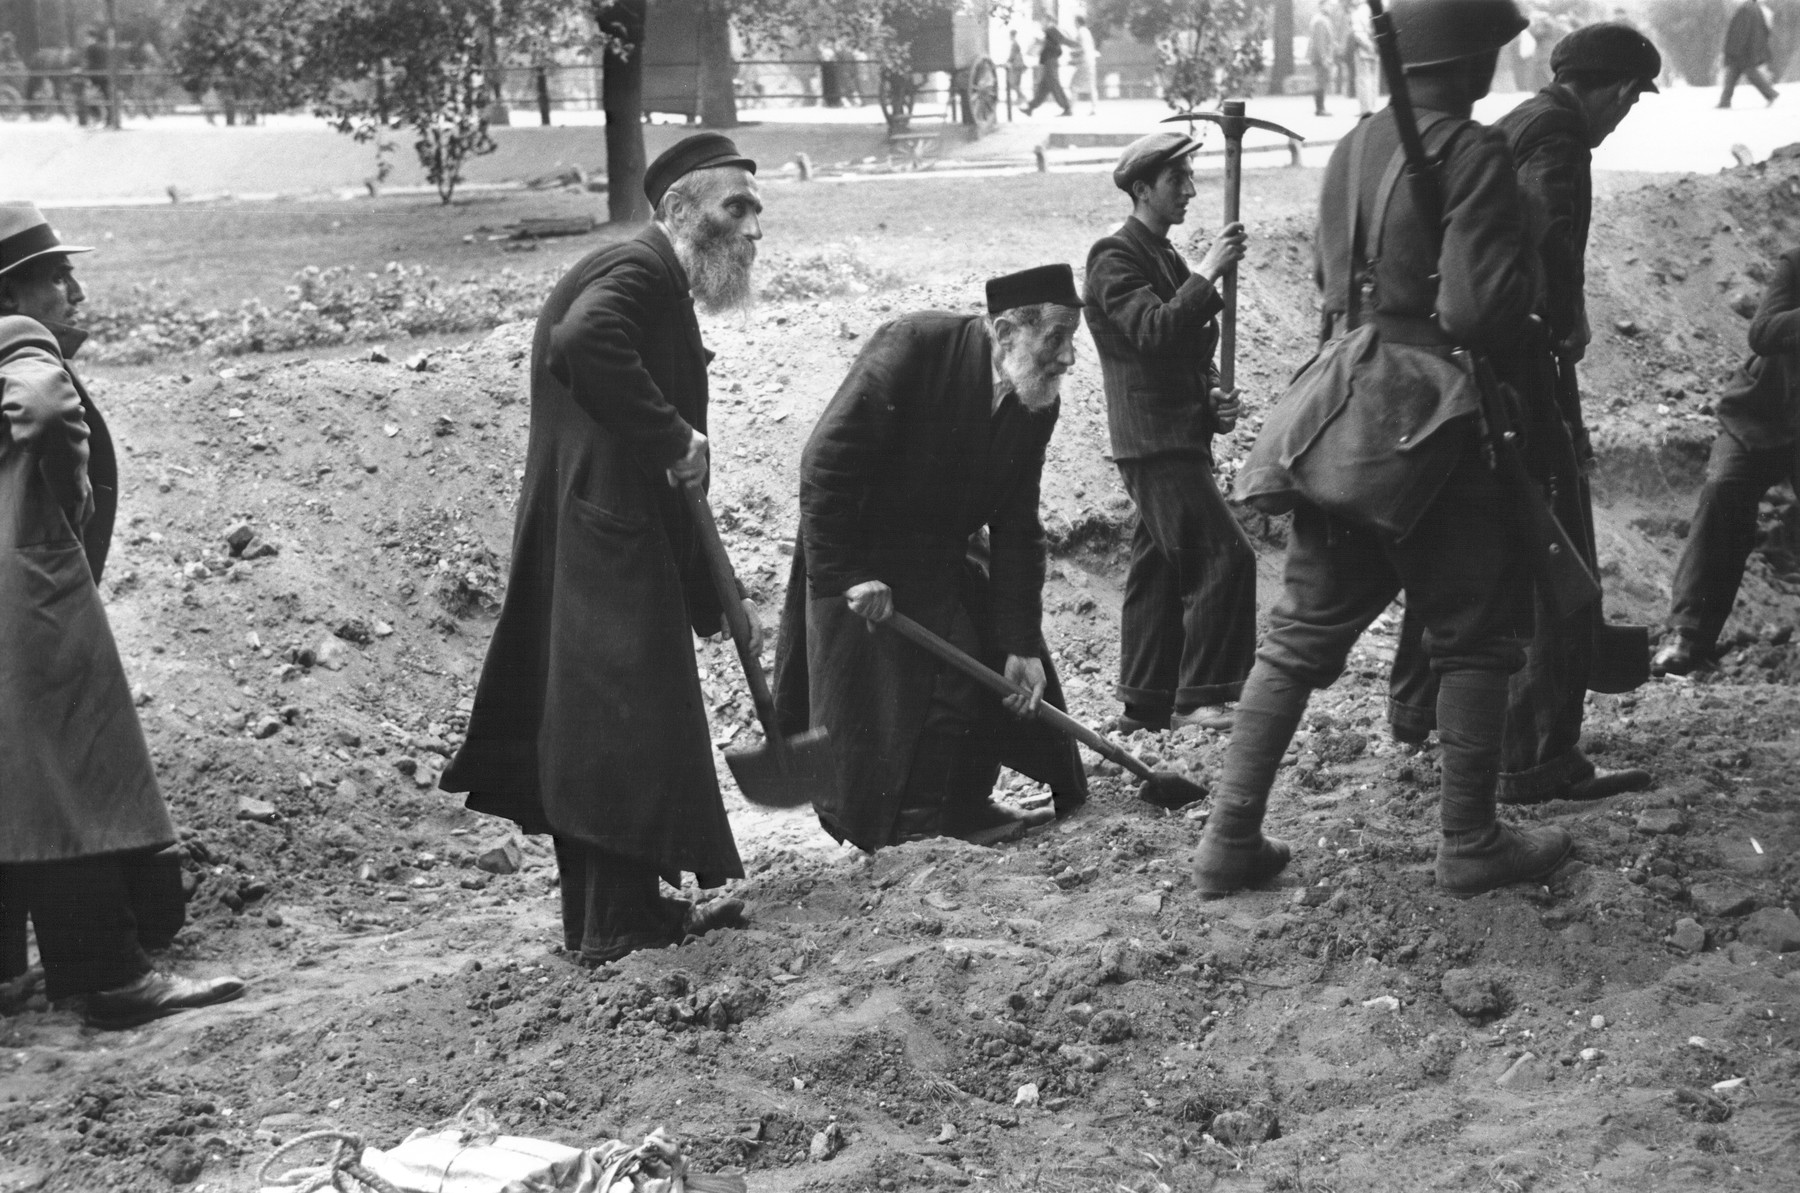 Under the supervision of Polish soldiers, elderly religious Jews dig anti-tank trenches to impede the German invasion.